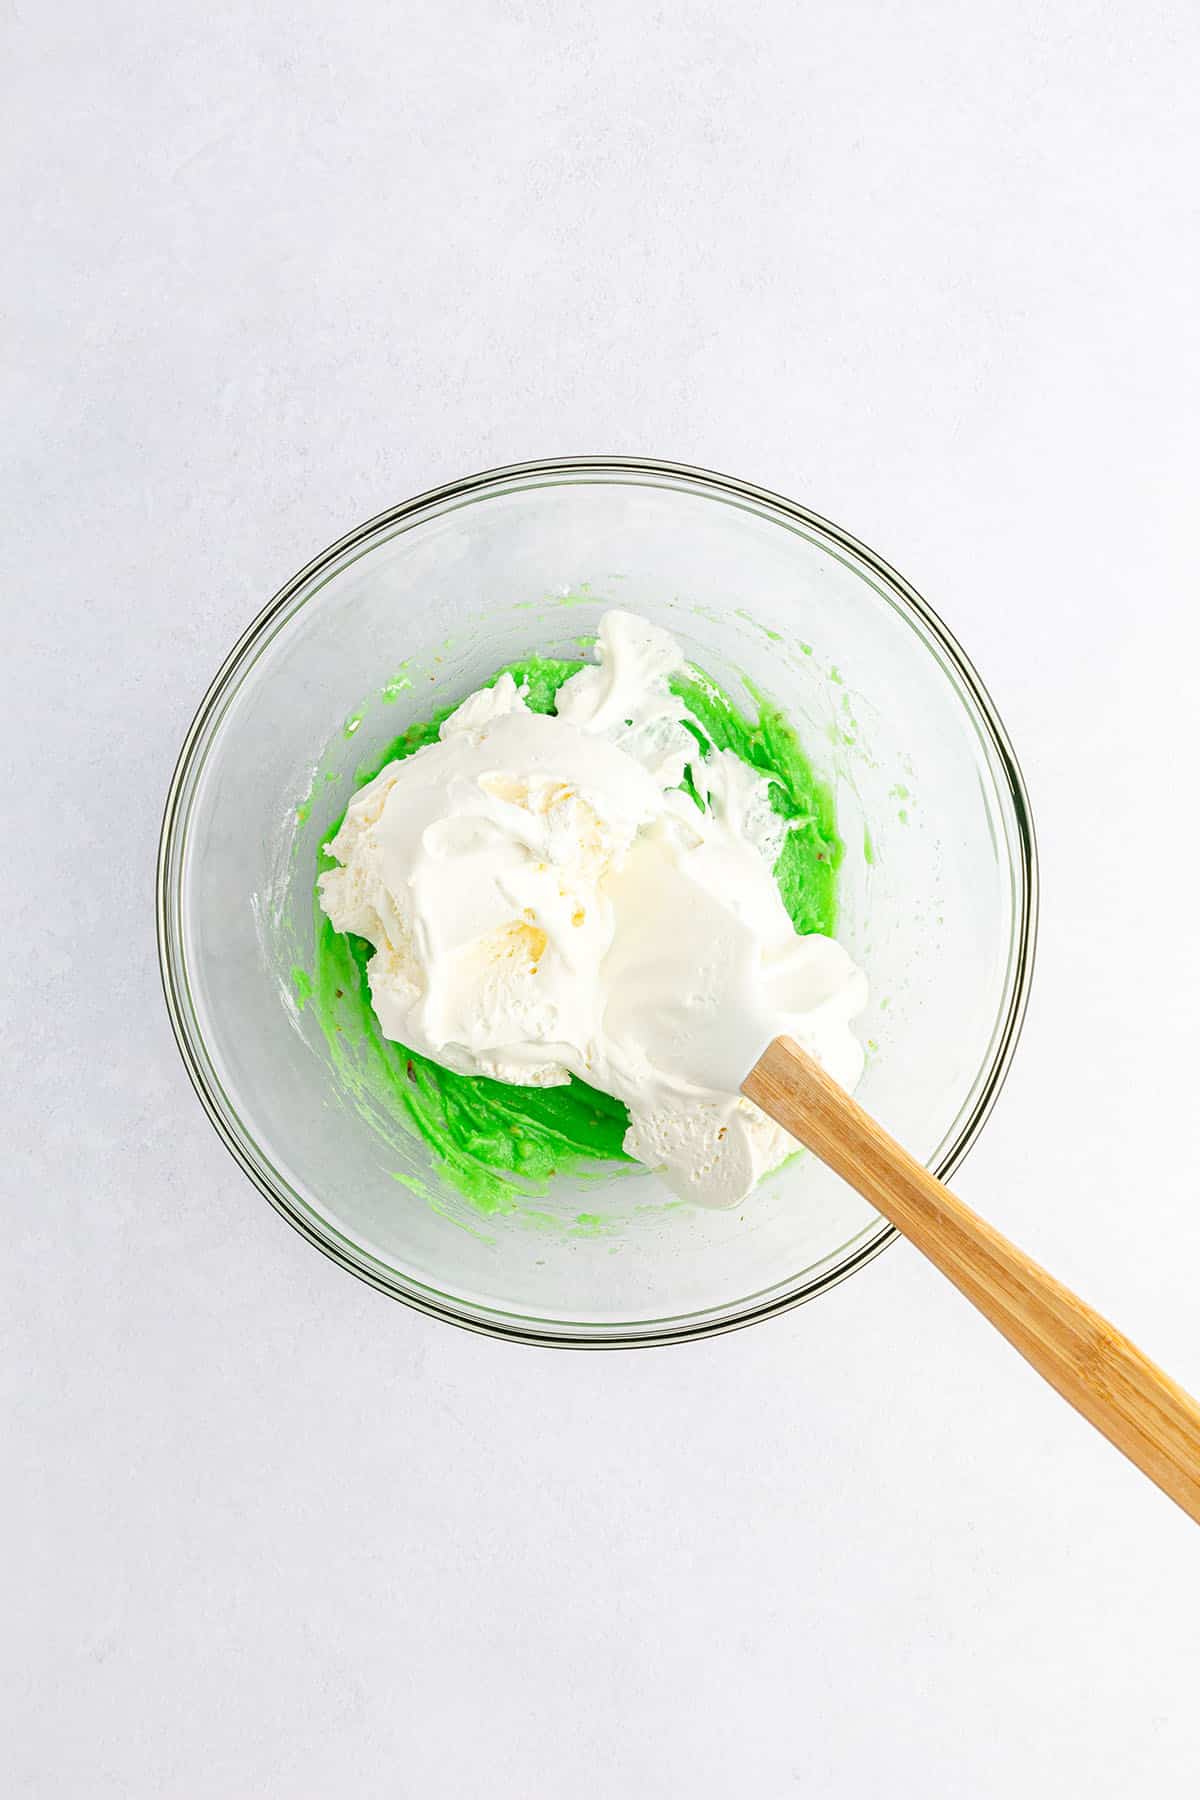 Green pudding mixture with whipped cream on top and spatula